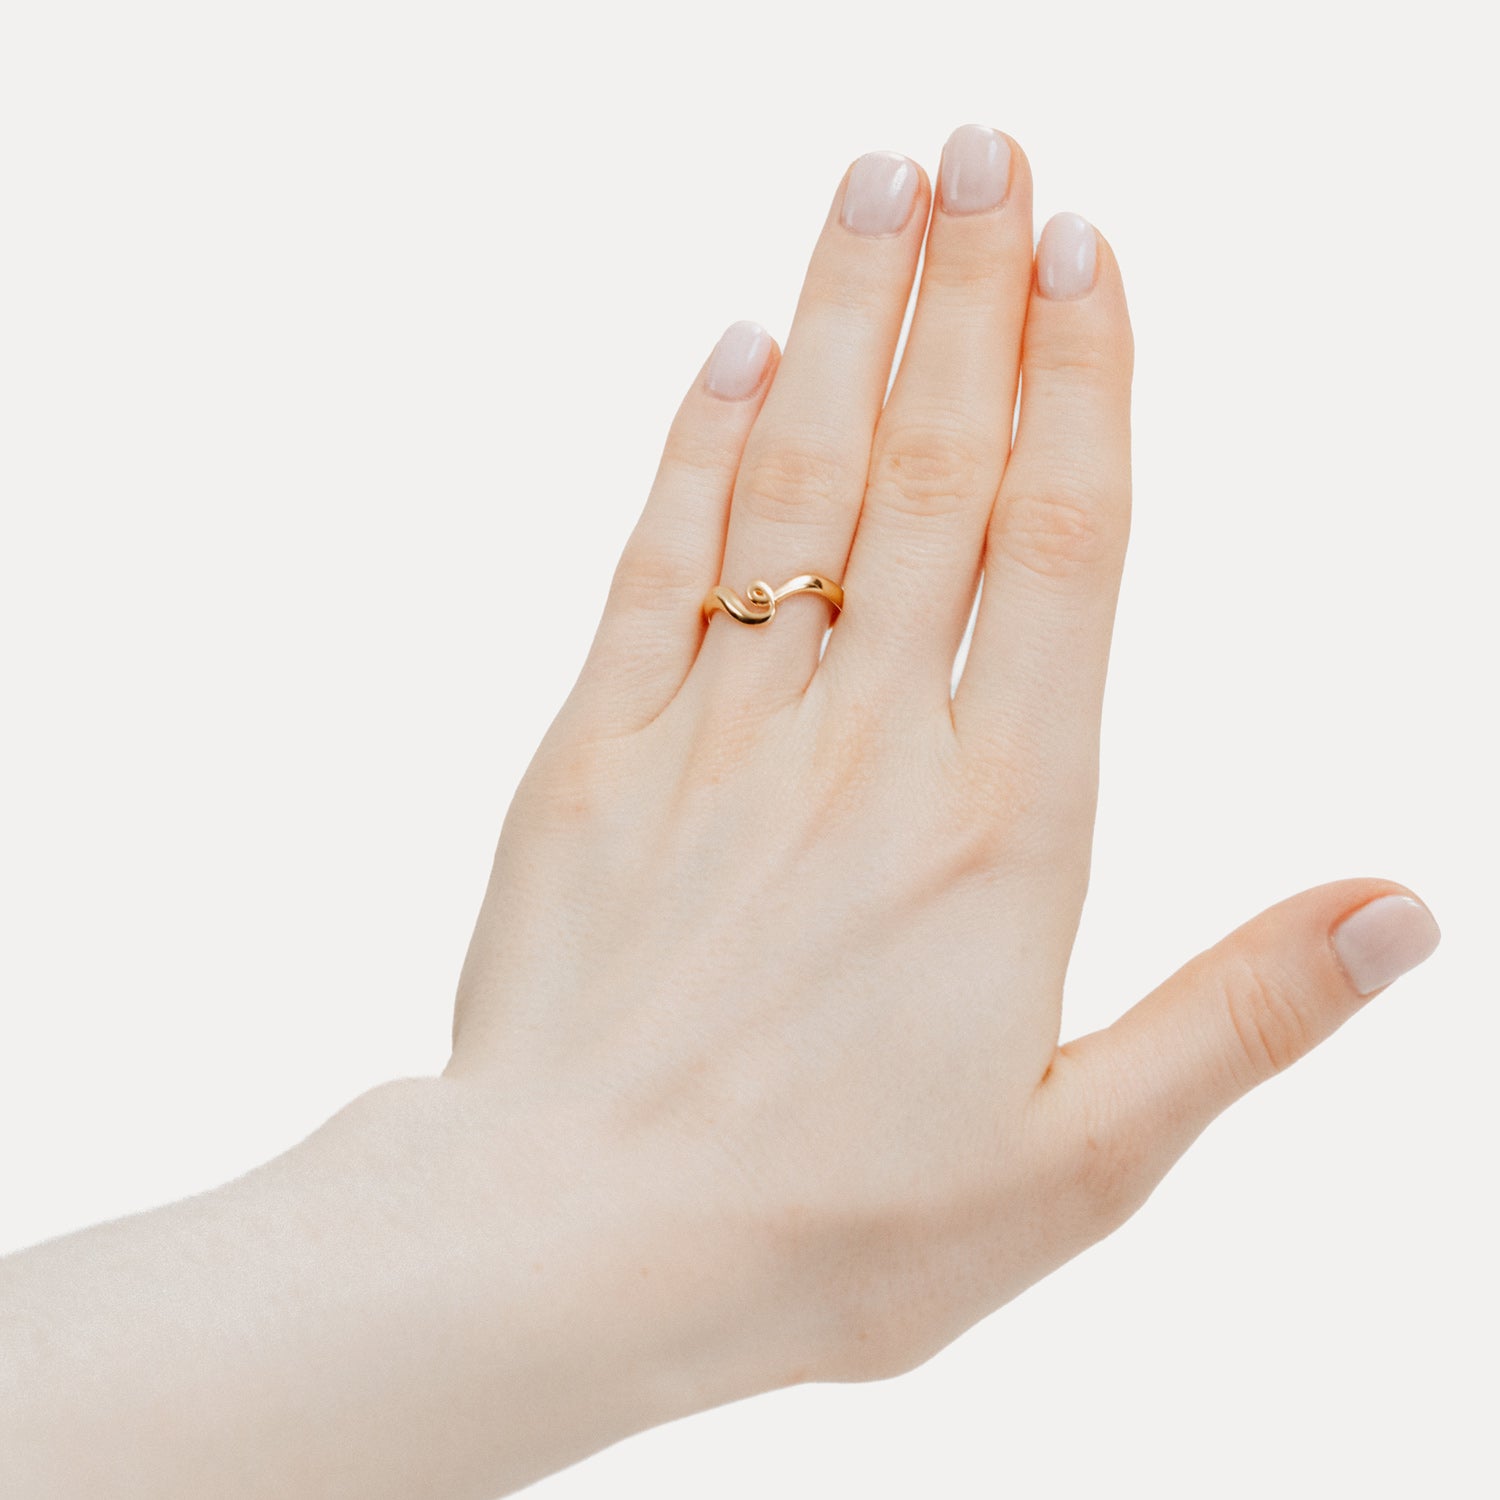 Poise Twirl Ring, recycled 18k Gold Vermeil, shown on hand - VEYIA Berlin